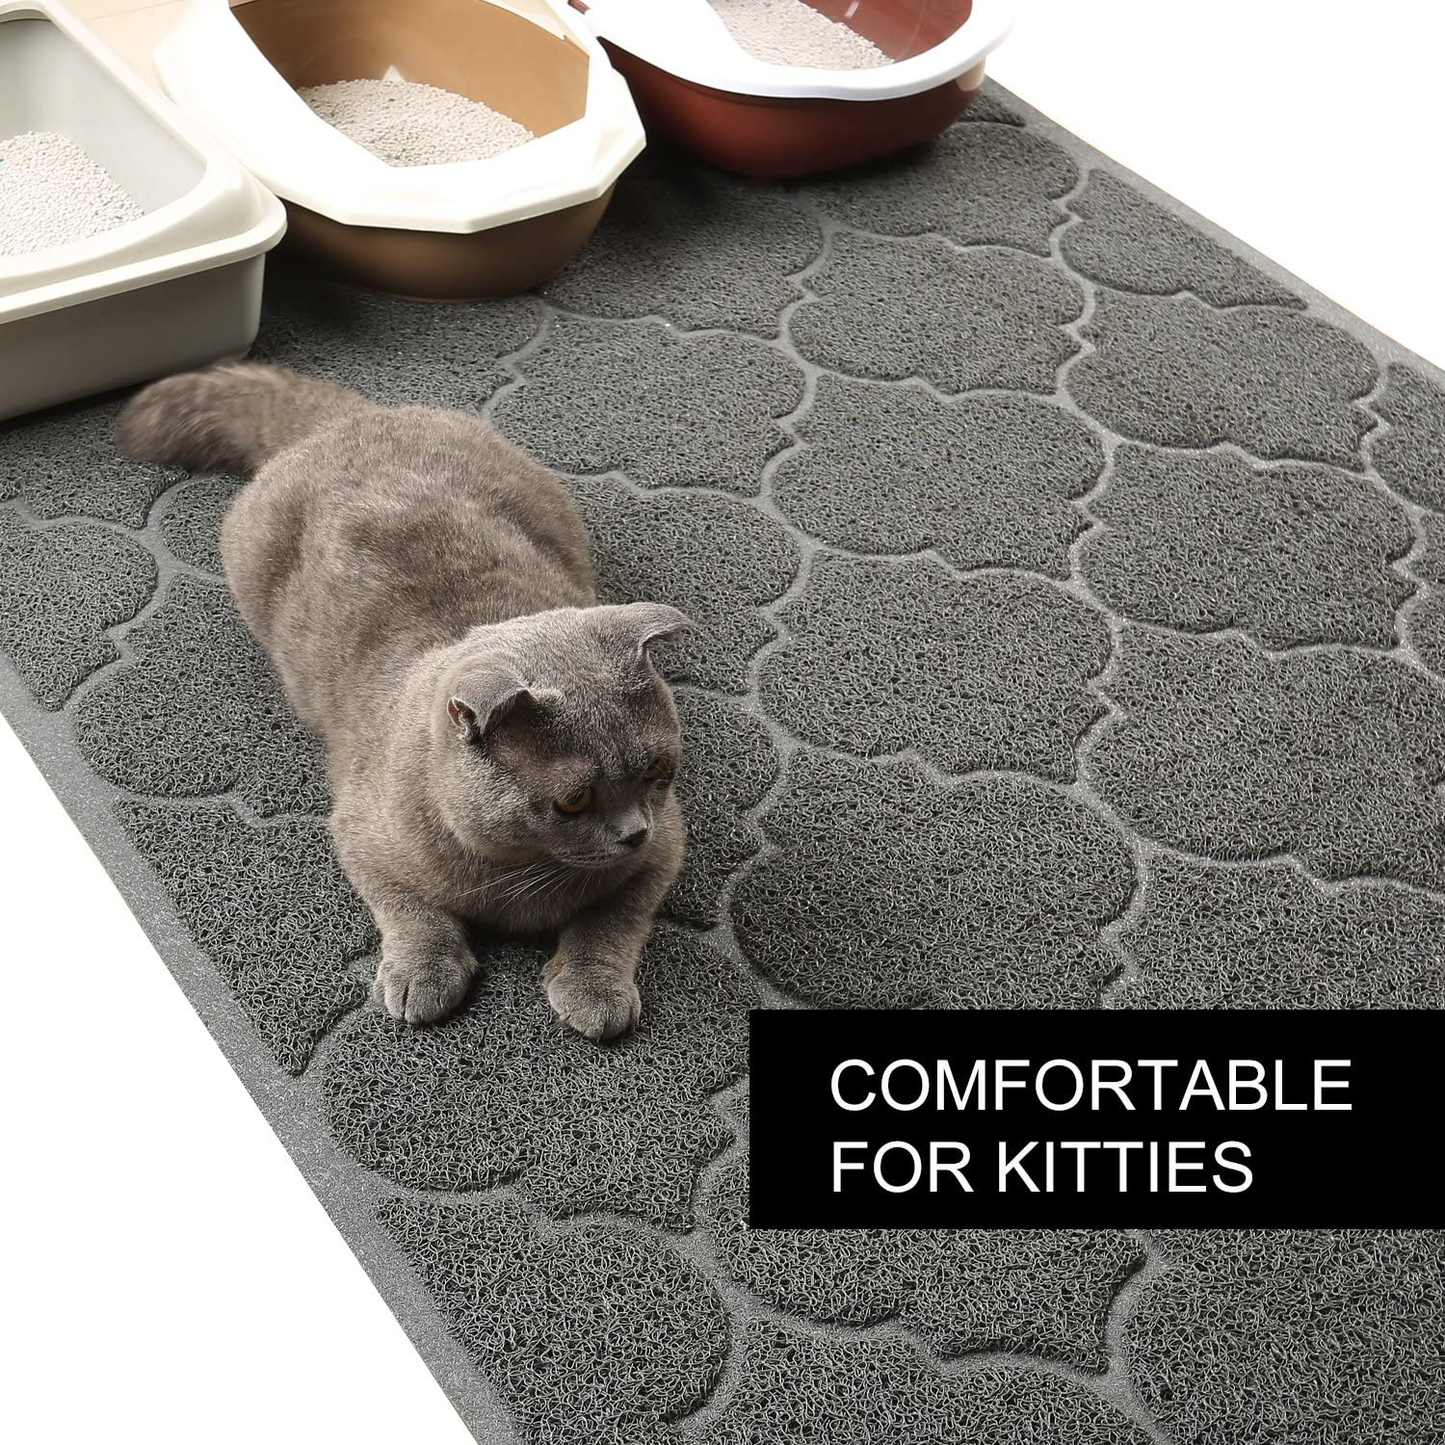 Cat Litter Mat, XL Super Size, Phthalate Free, Easy to Clean, 46X35 Inches, Durable, Soft on Paws, Large Litter Mat.